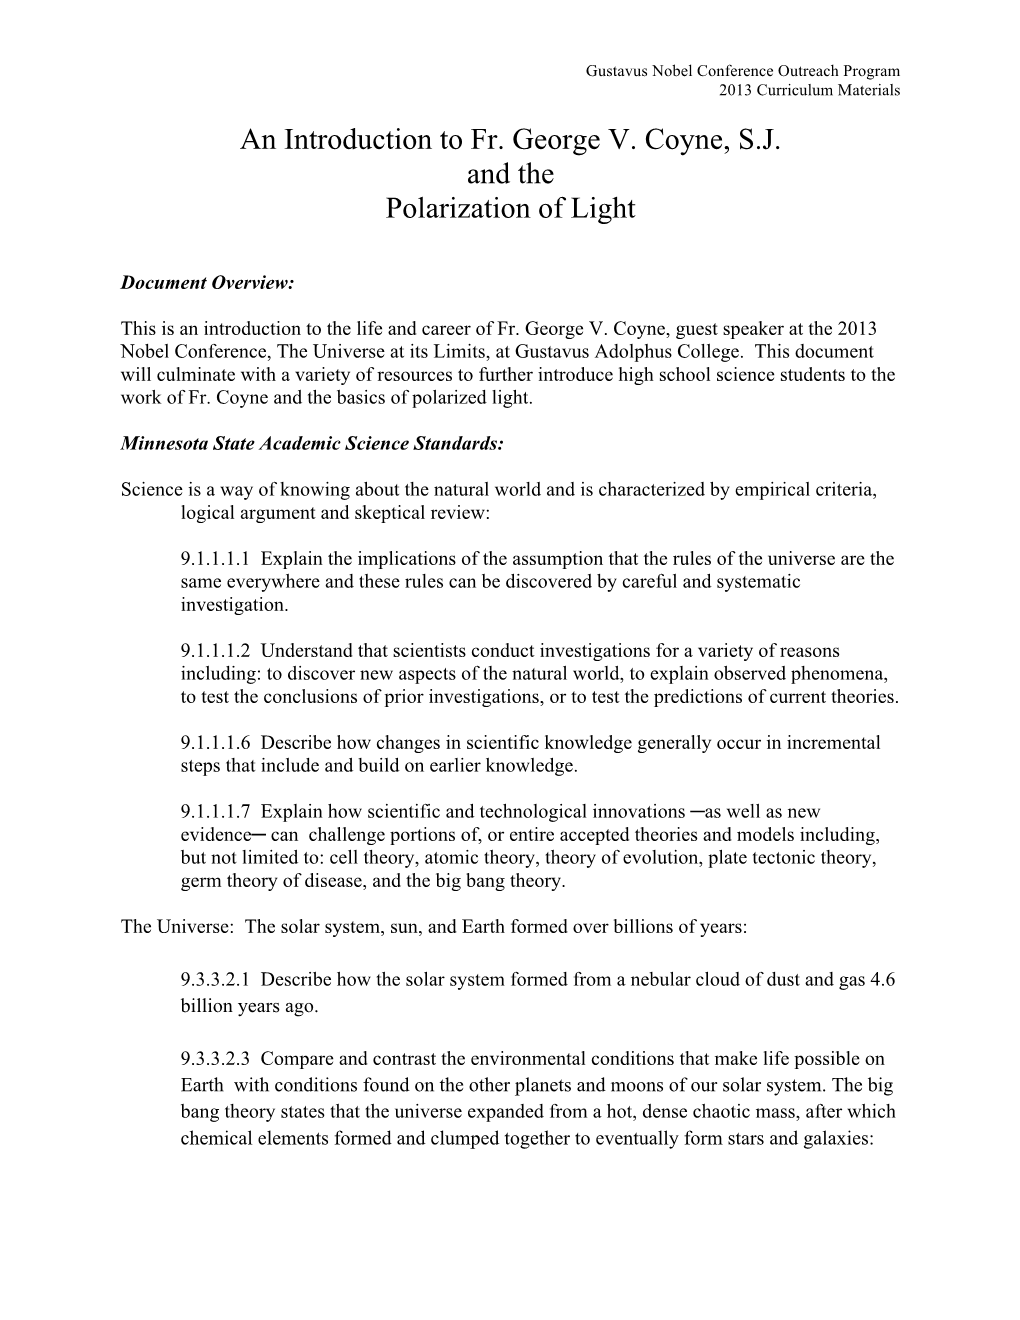 An Introduction to Fr. George V. Coyne, S.J. and the Polarization of Light